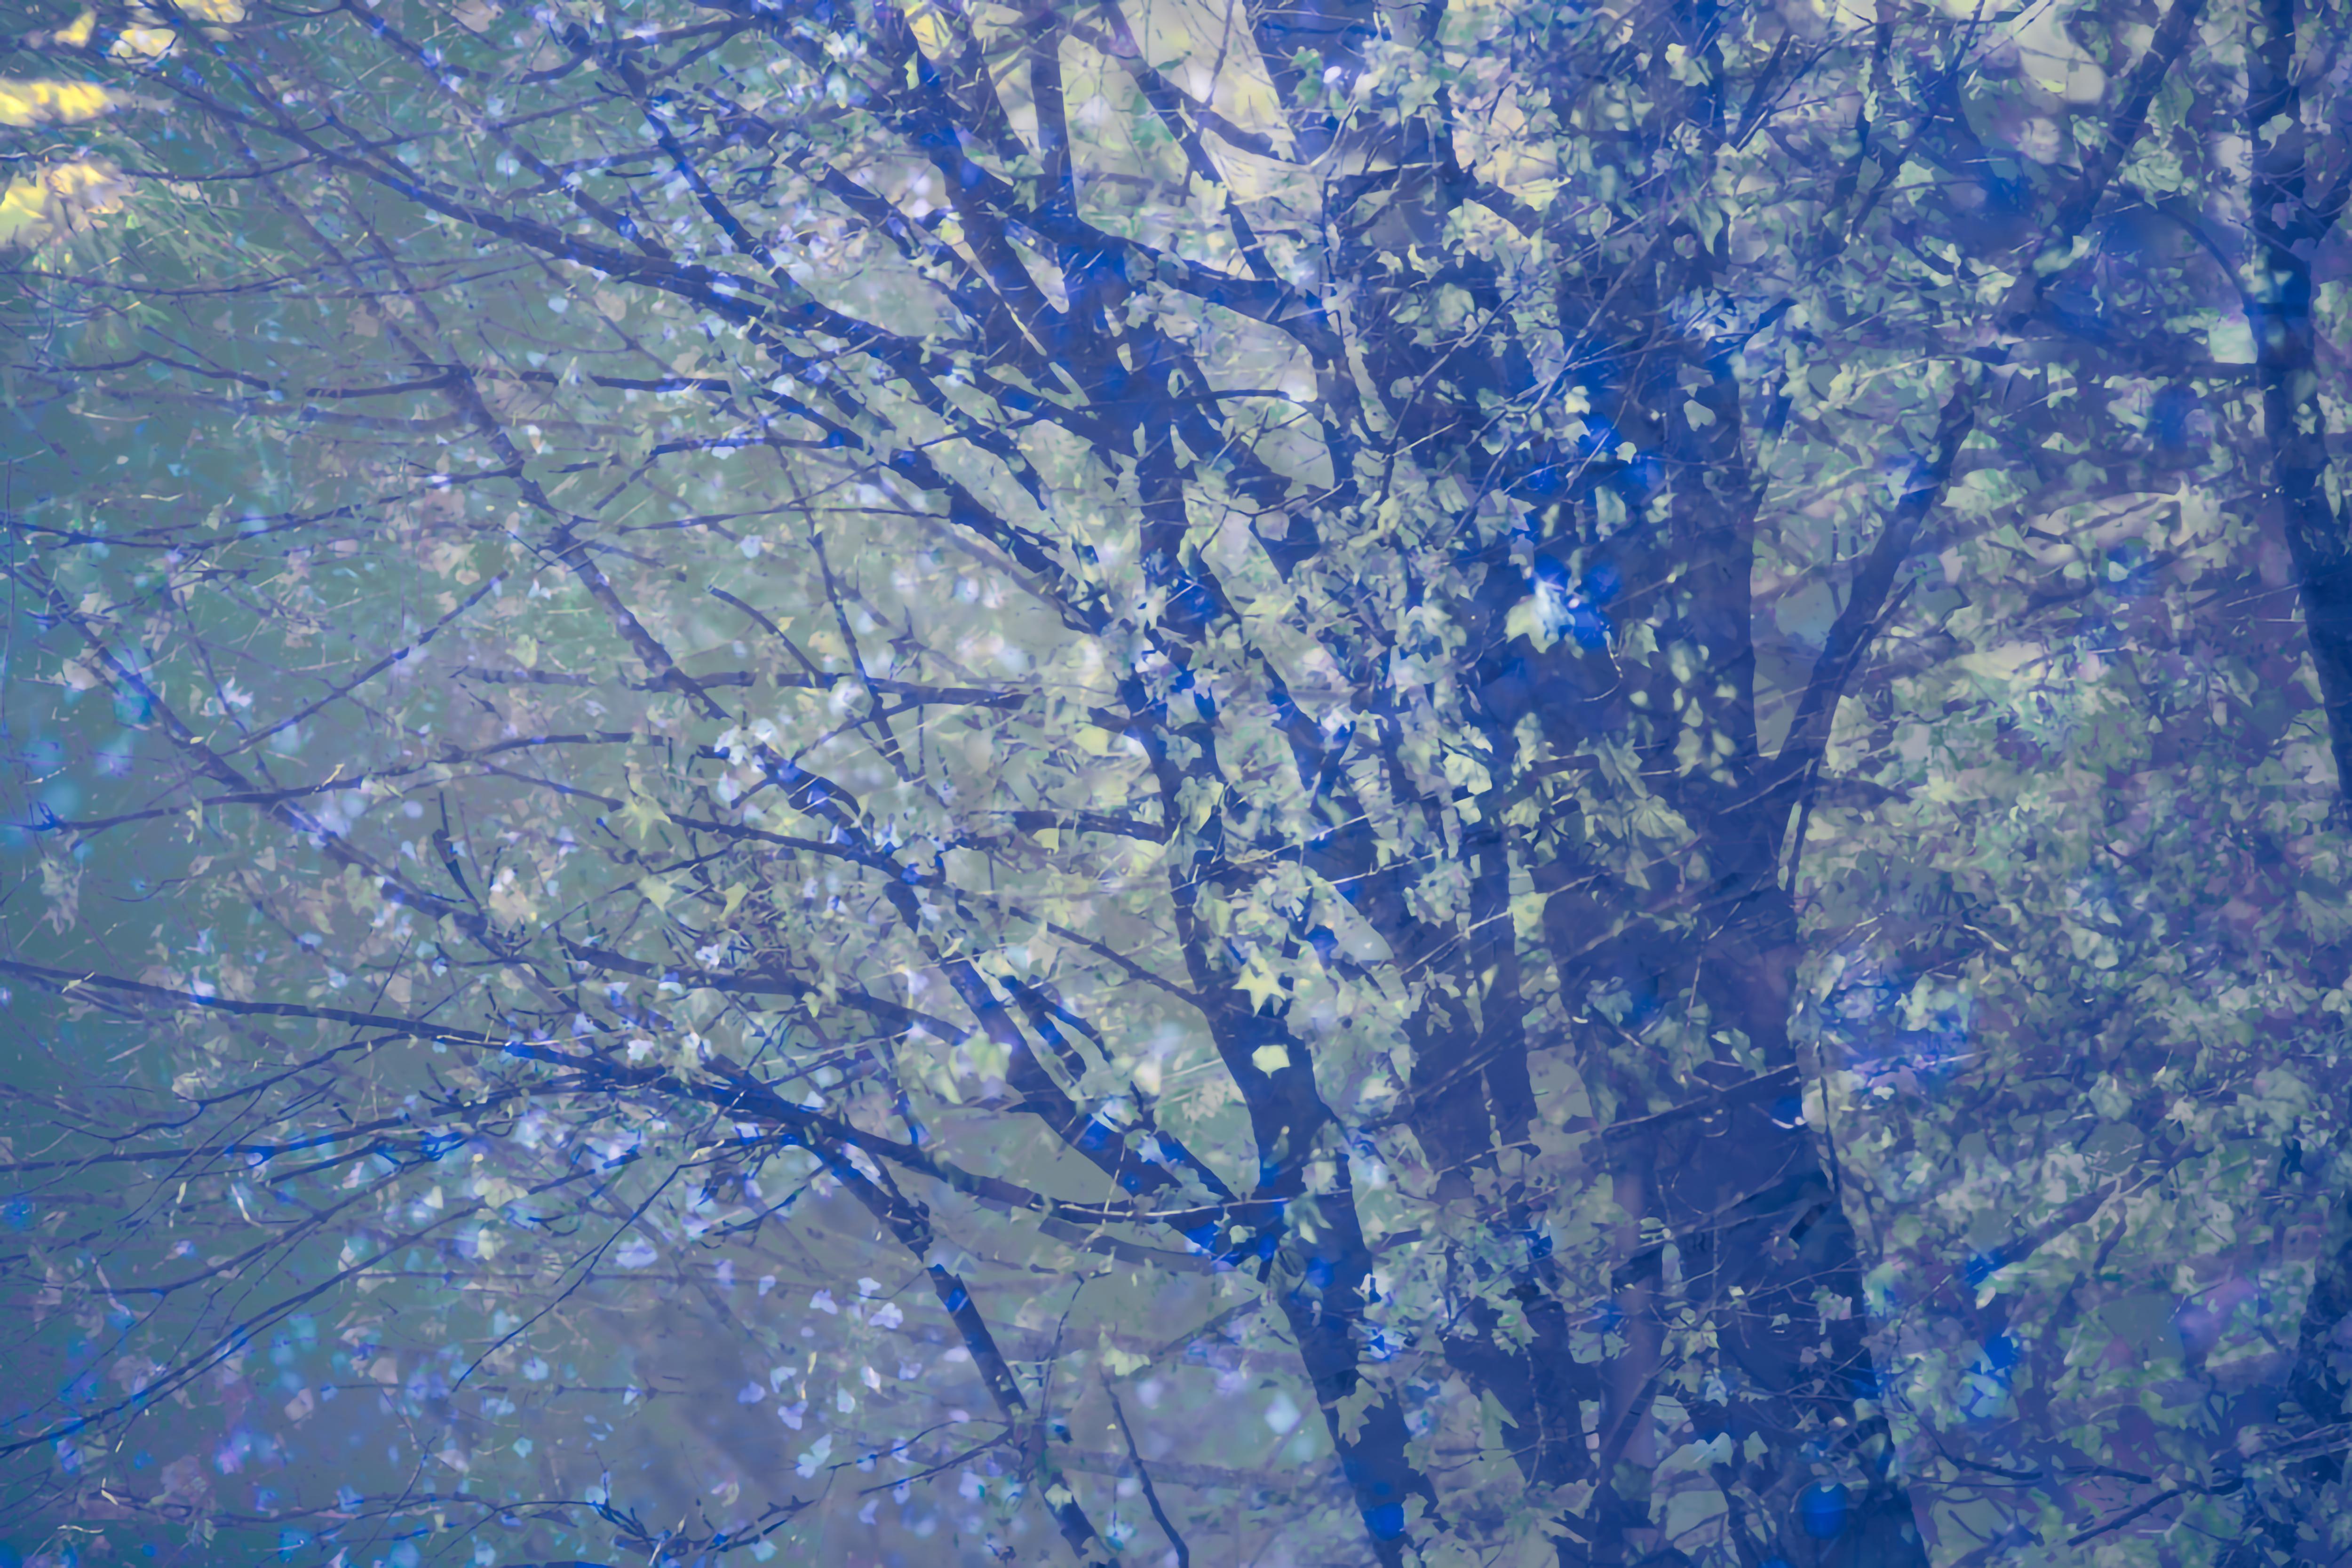 Tori Gagne Abstract Photograph - "Blue" Abstract Nature Photograph, 24" x 36"